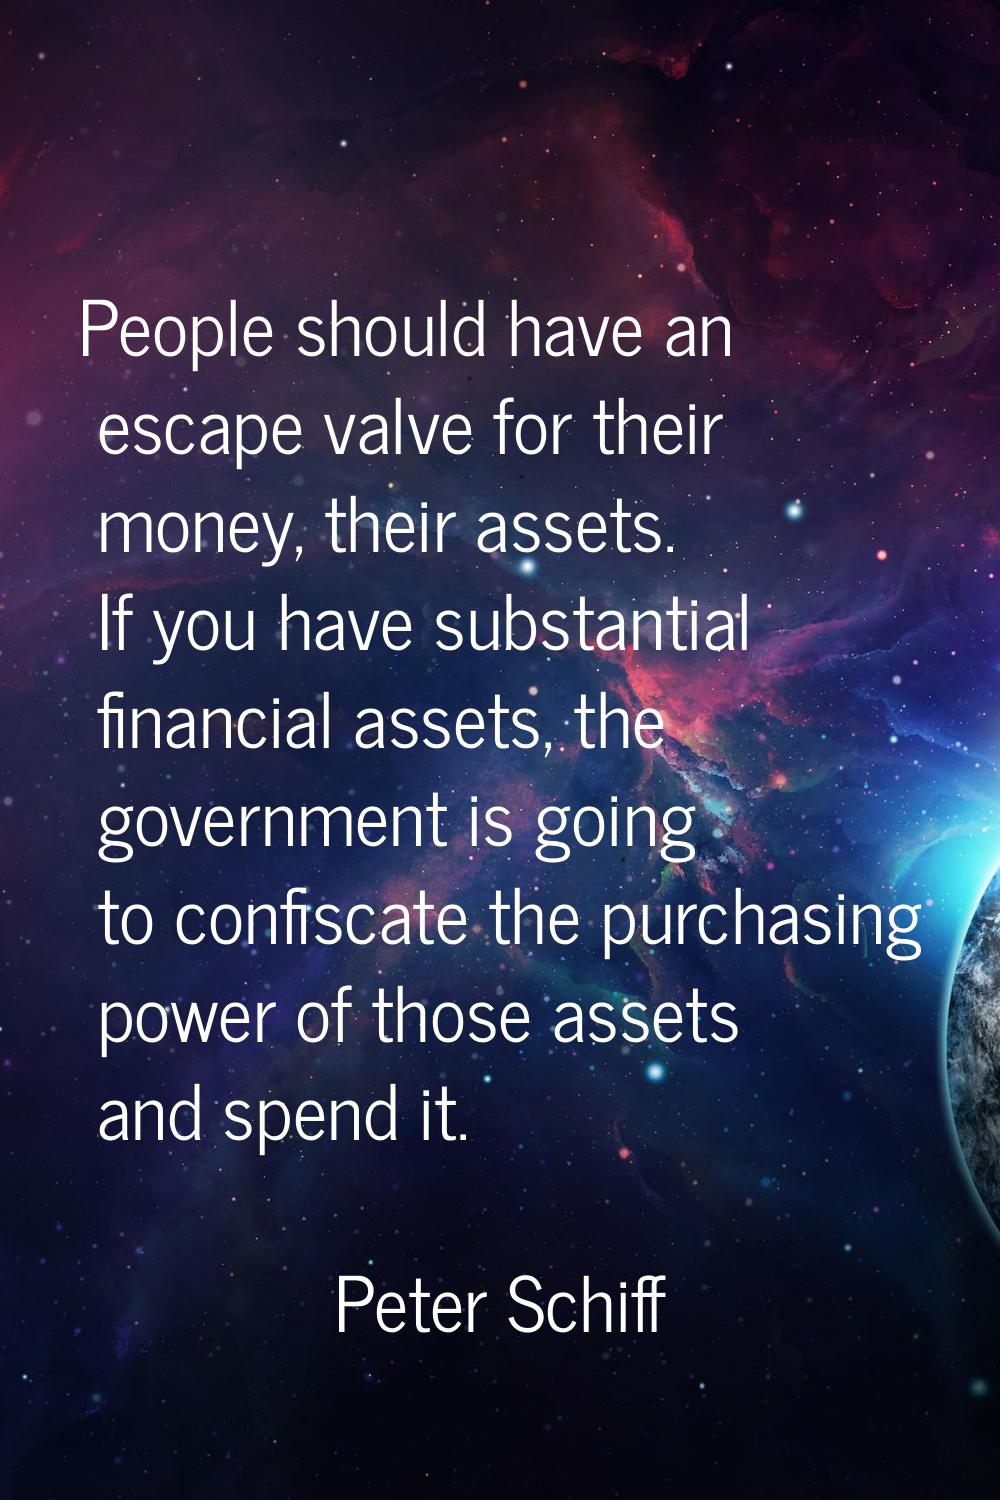 People should have an escape valve for their money, their assets. If you have substantial financial